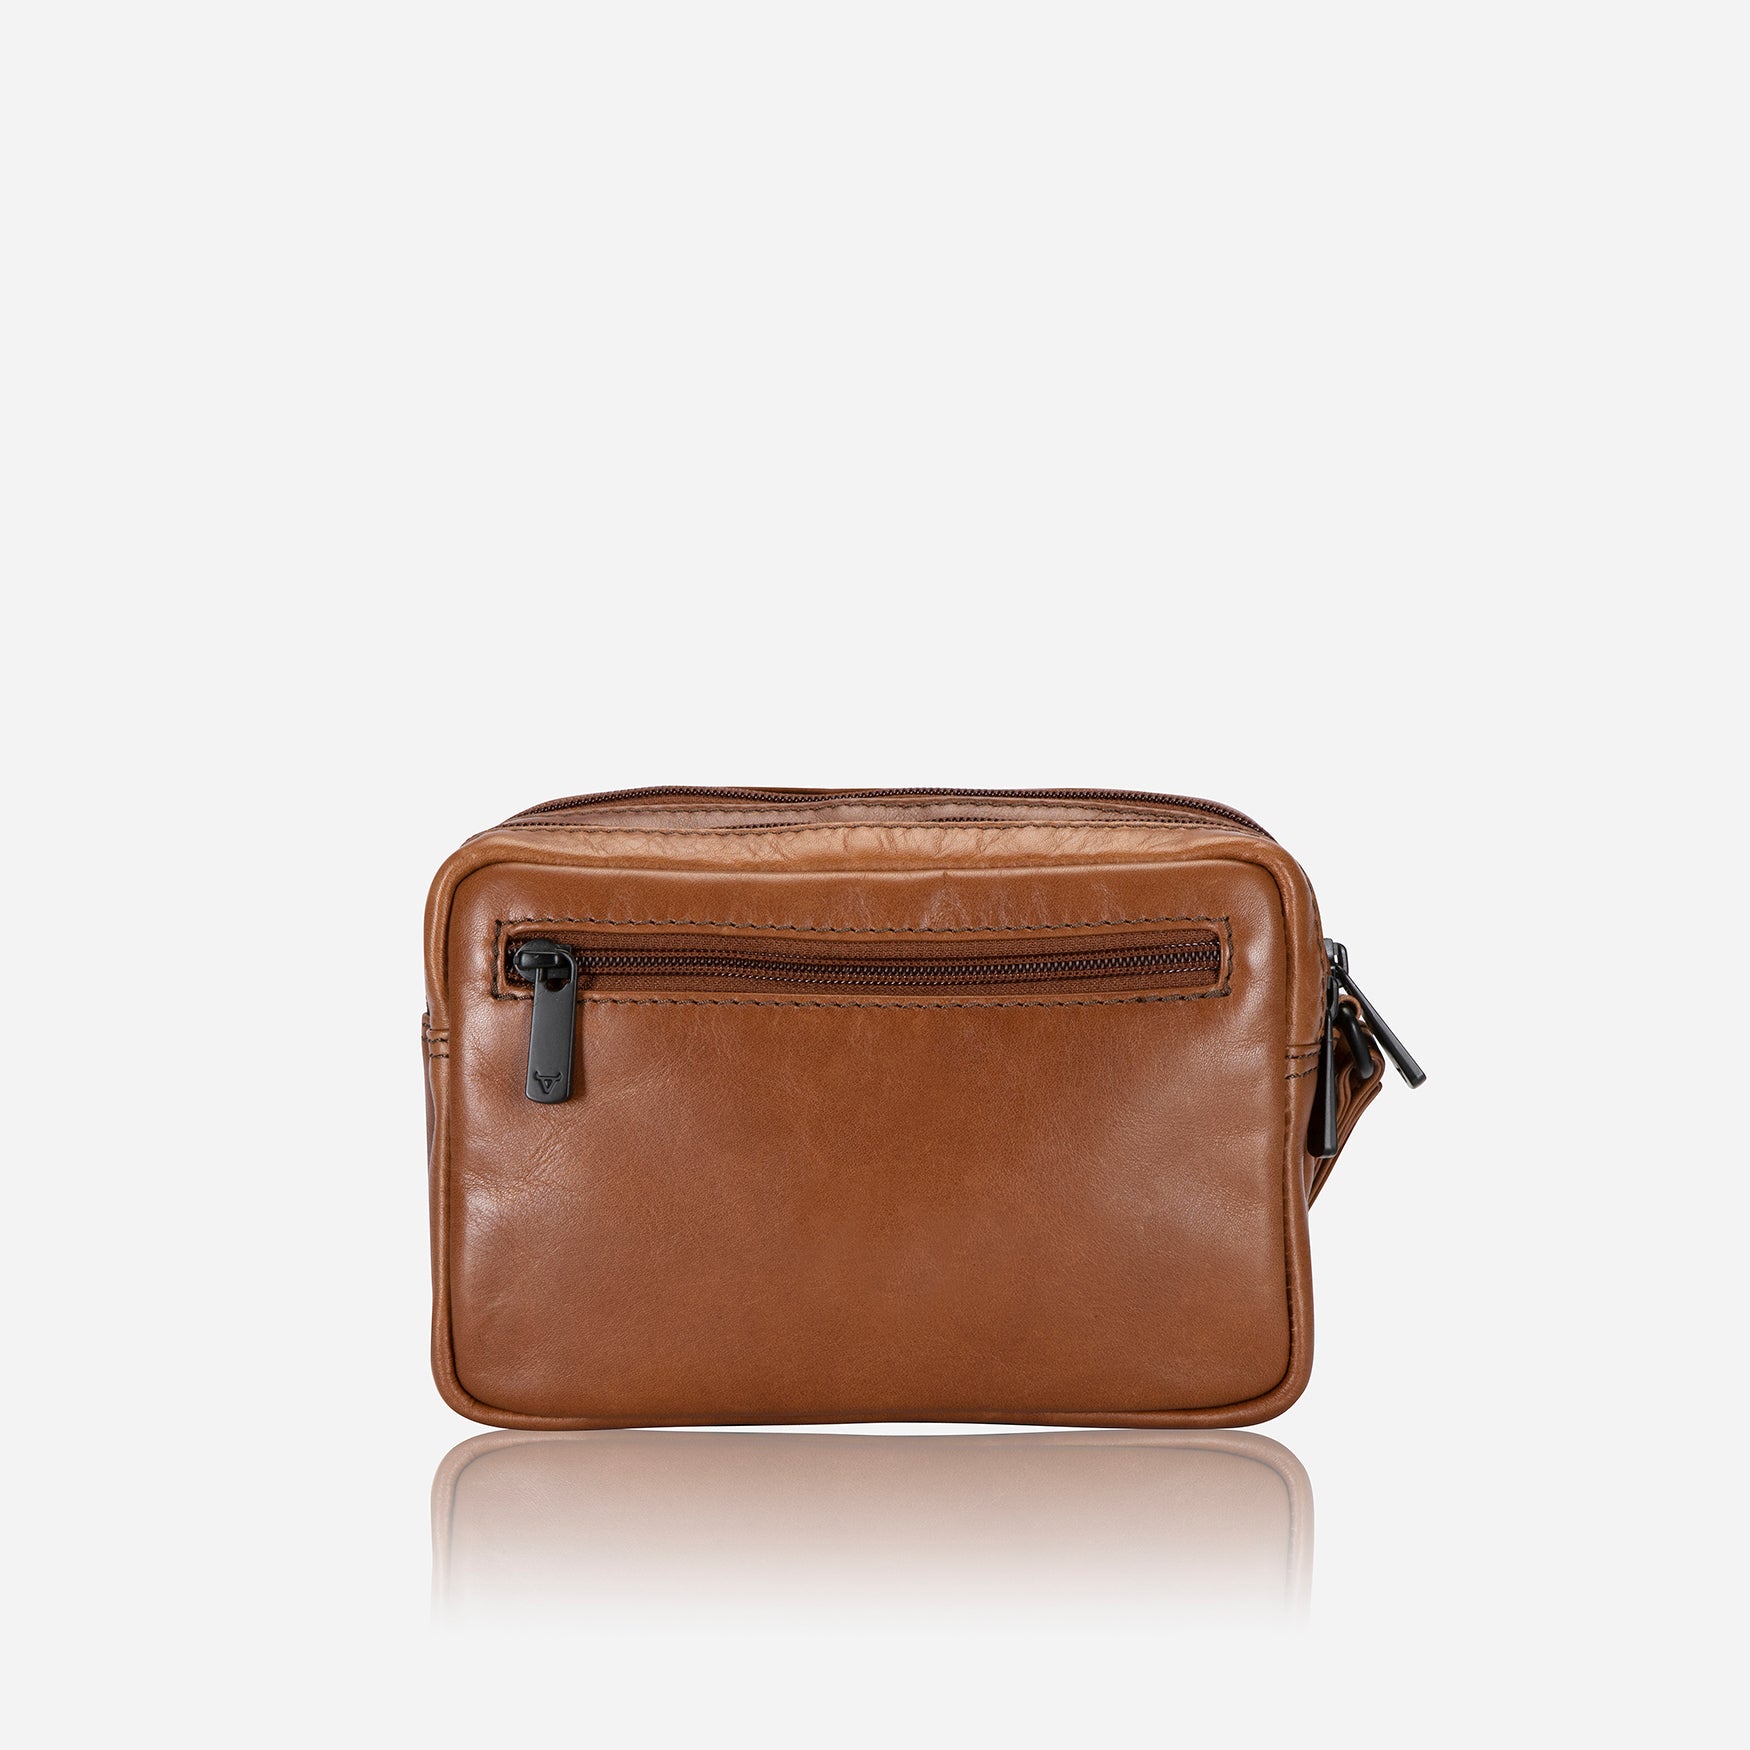 Gent's Bag With Hand Strap, Medium Brown